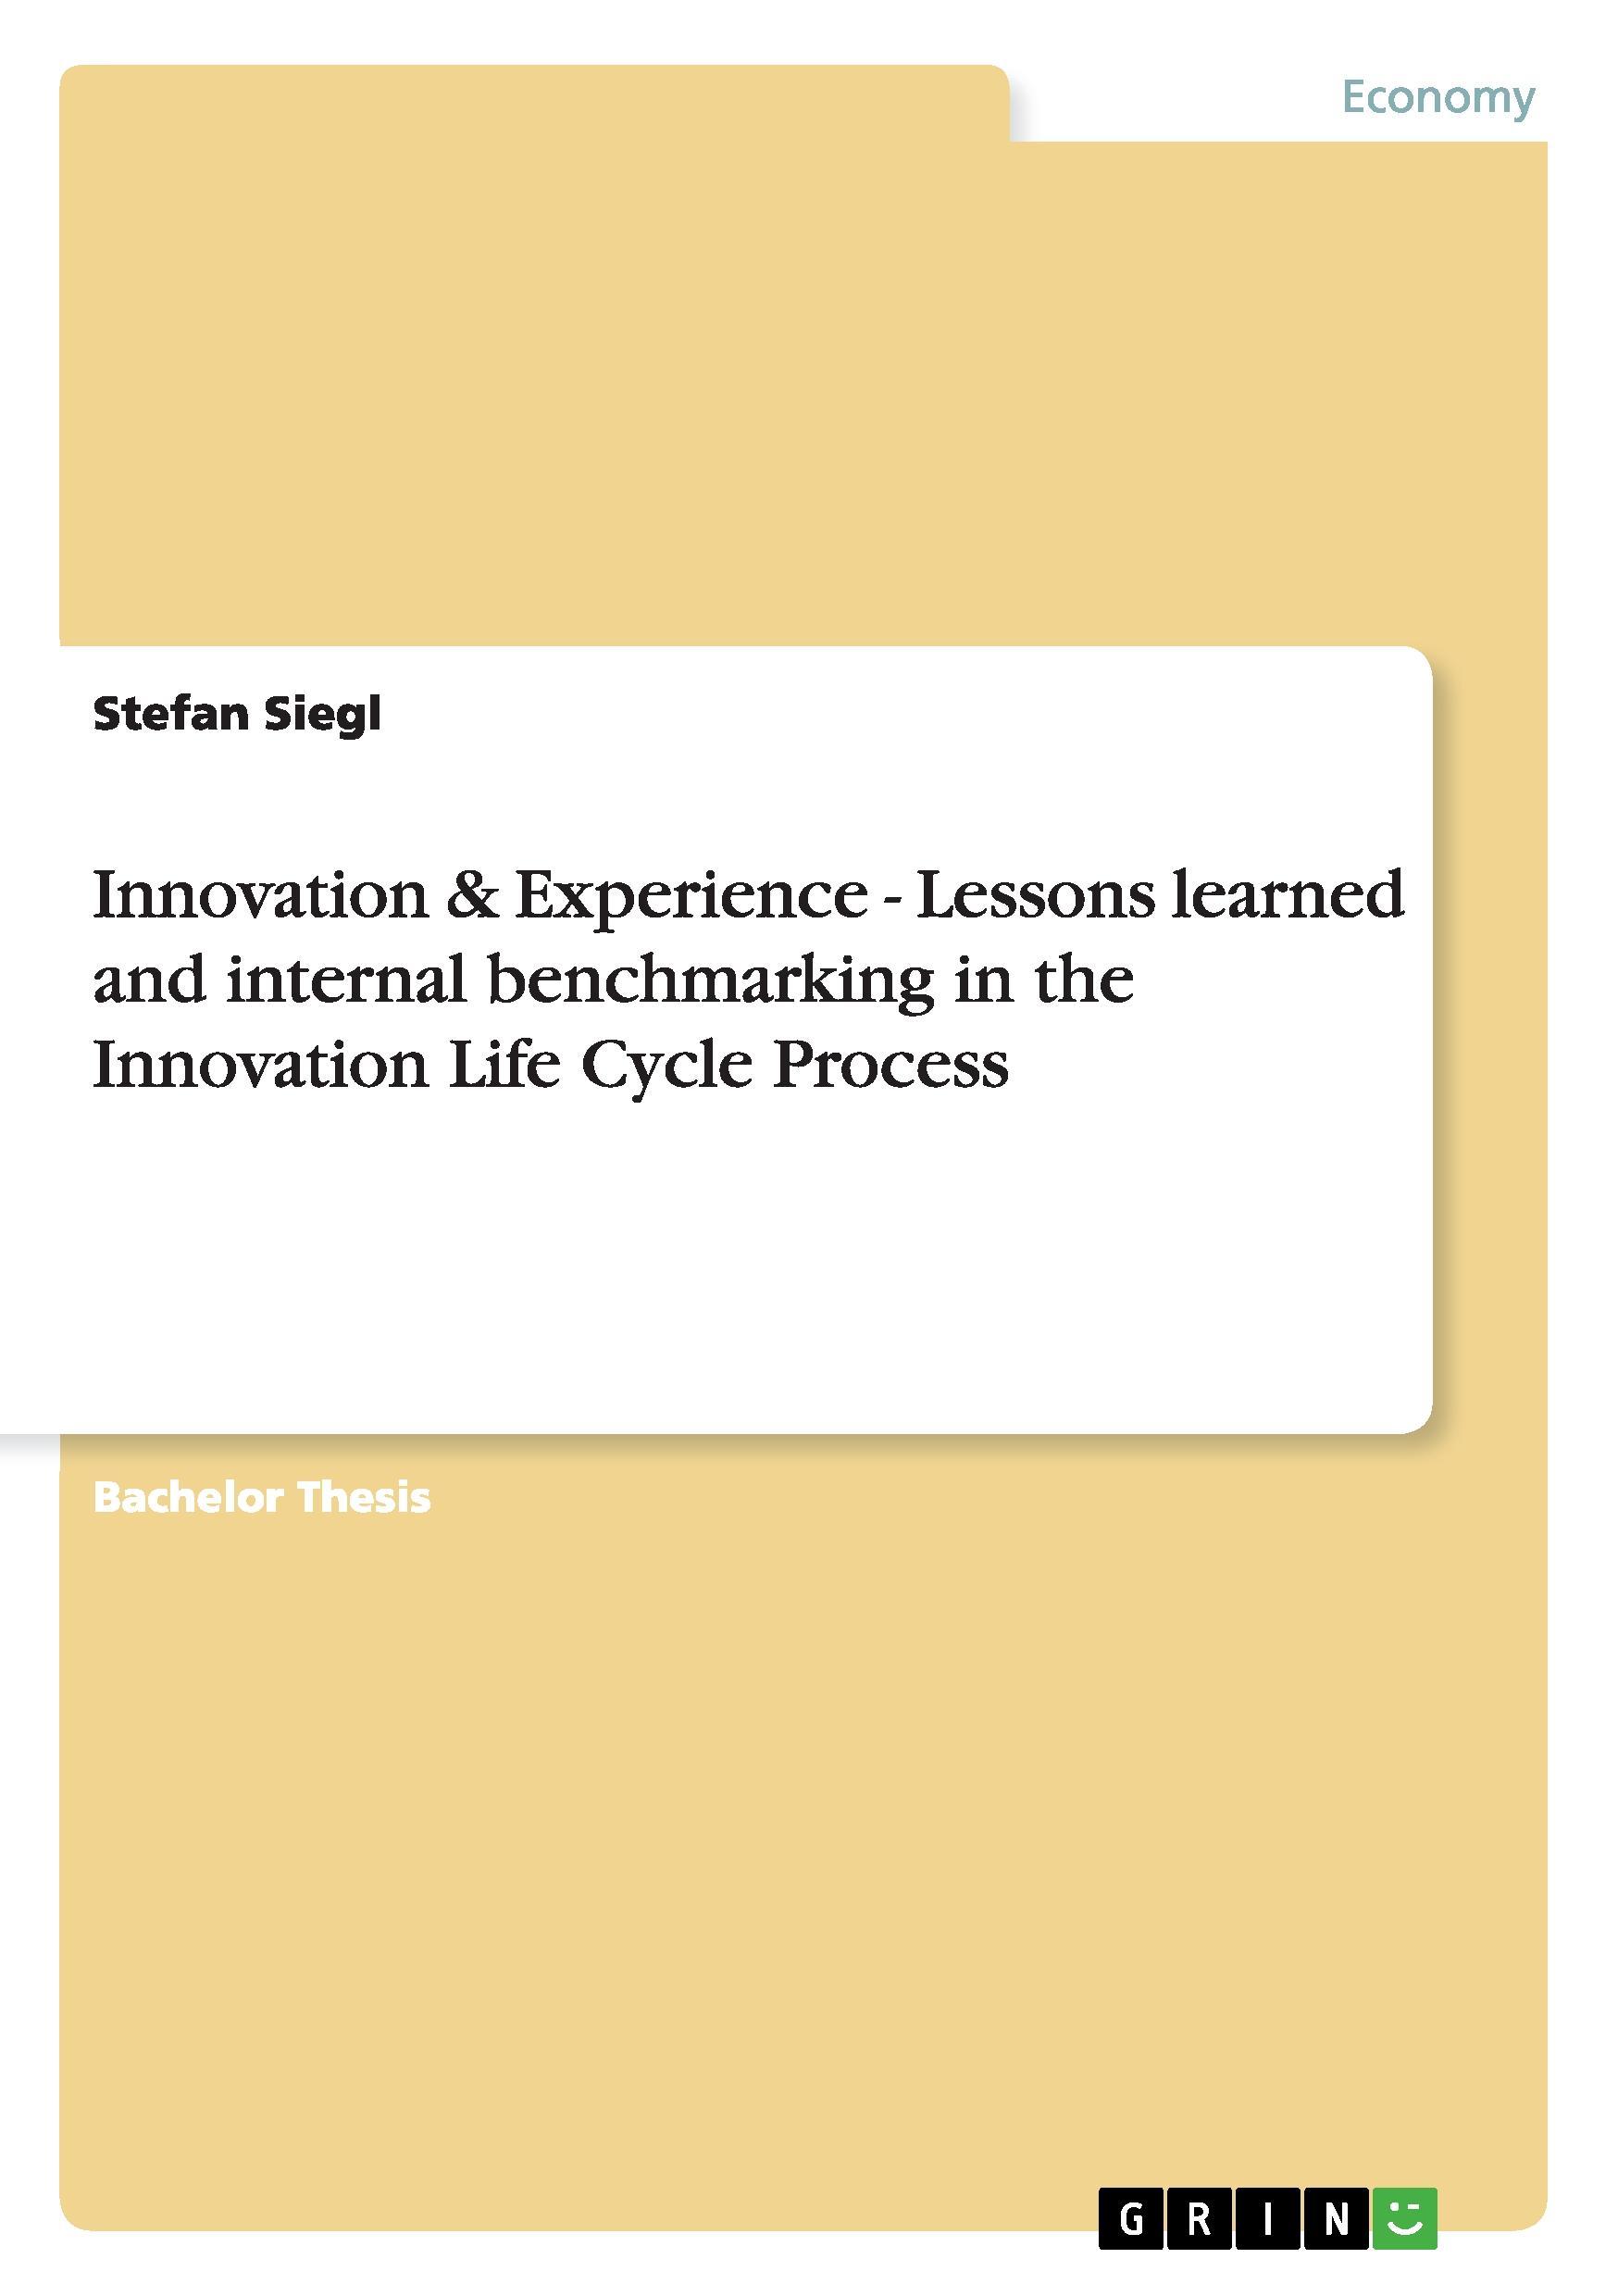 Innovation & Experience - Lessons learned and internal benchmarking in the Innovation Life Cycle Process - Siegl, Stefan